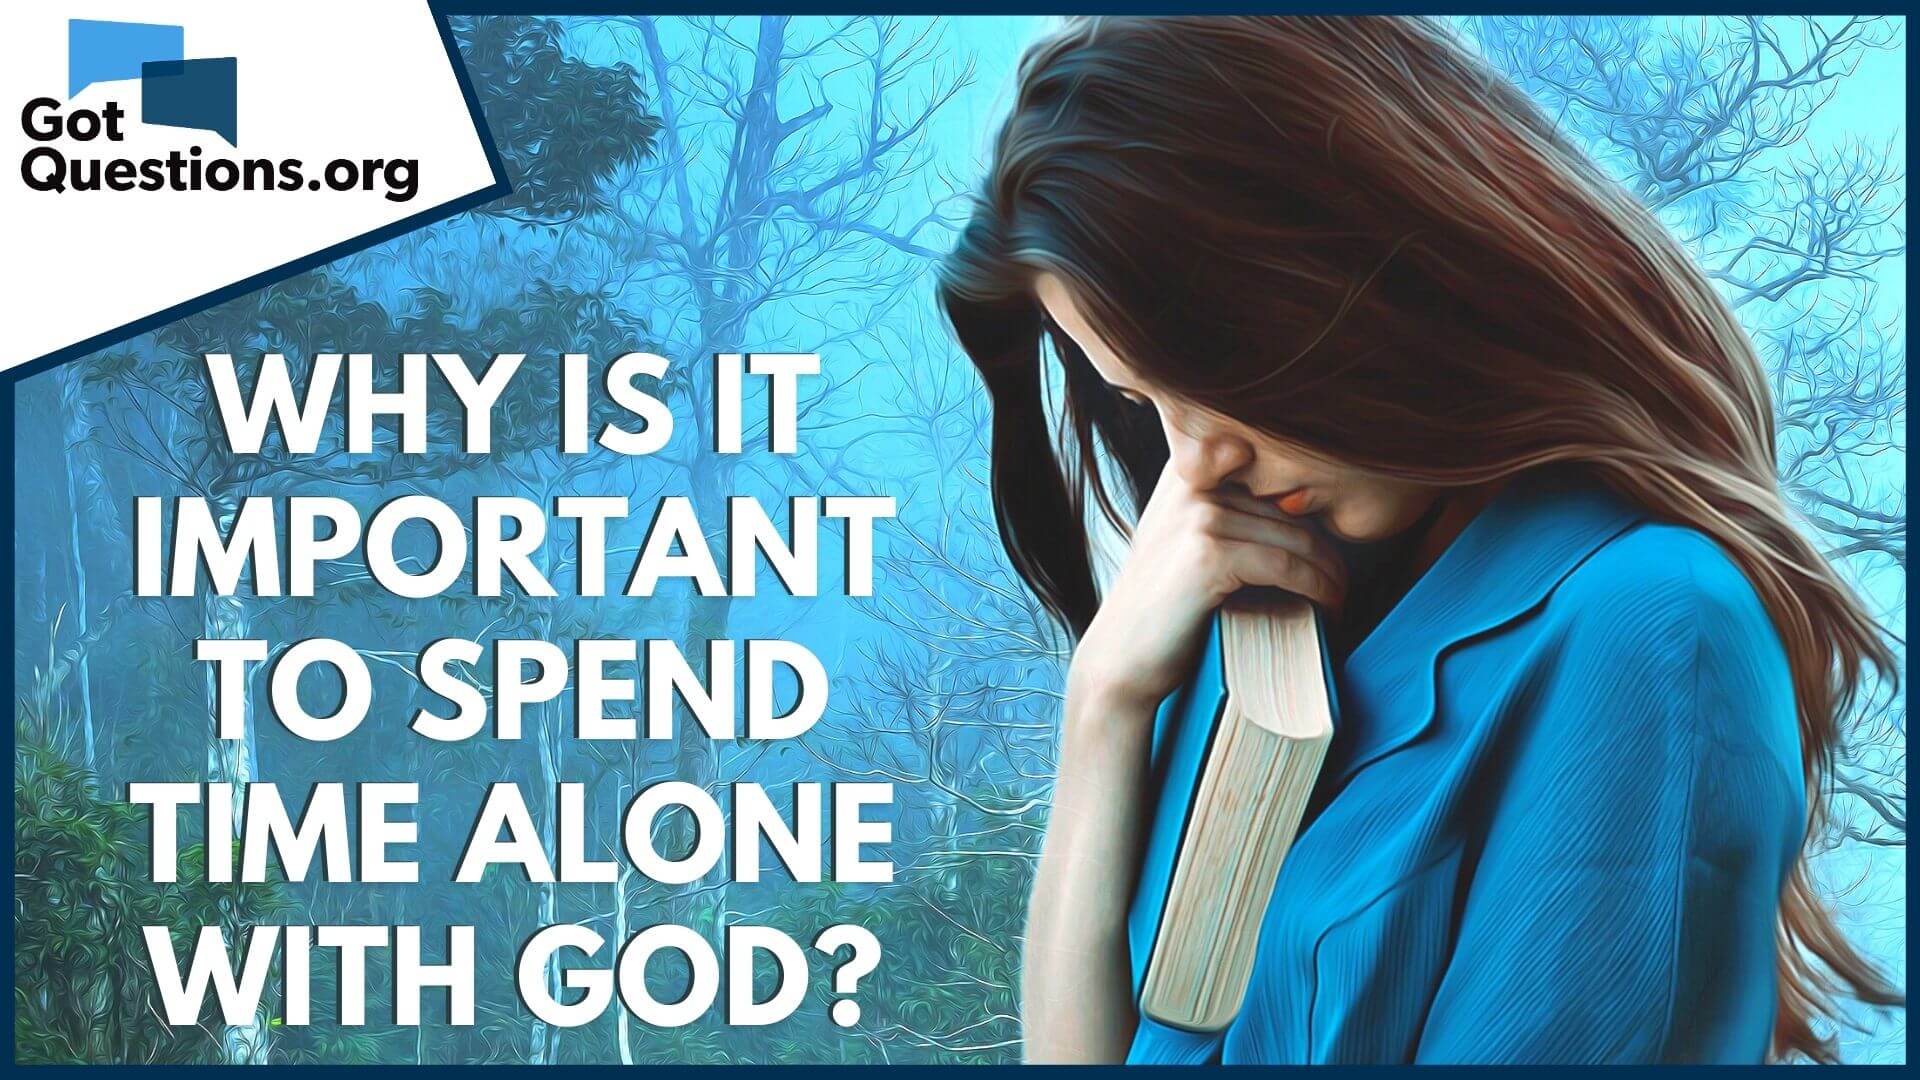 Was God Alone in the Beginning? The Bible Says No.